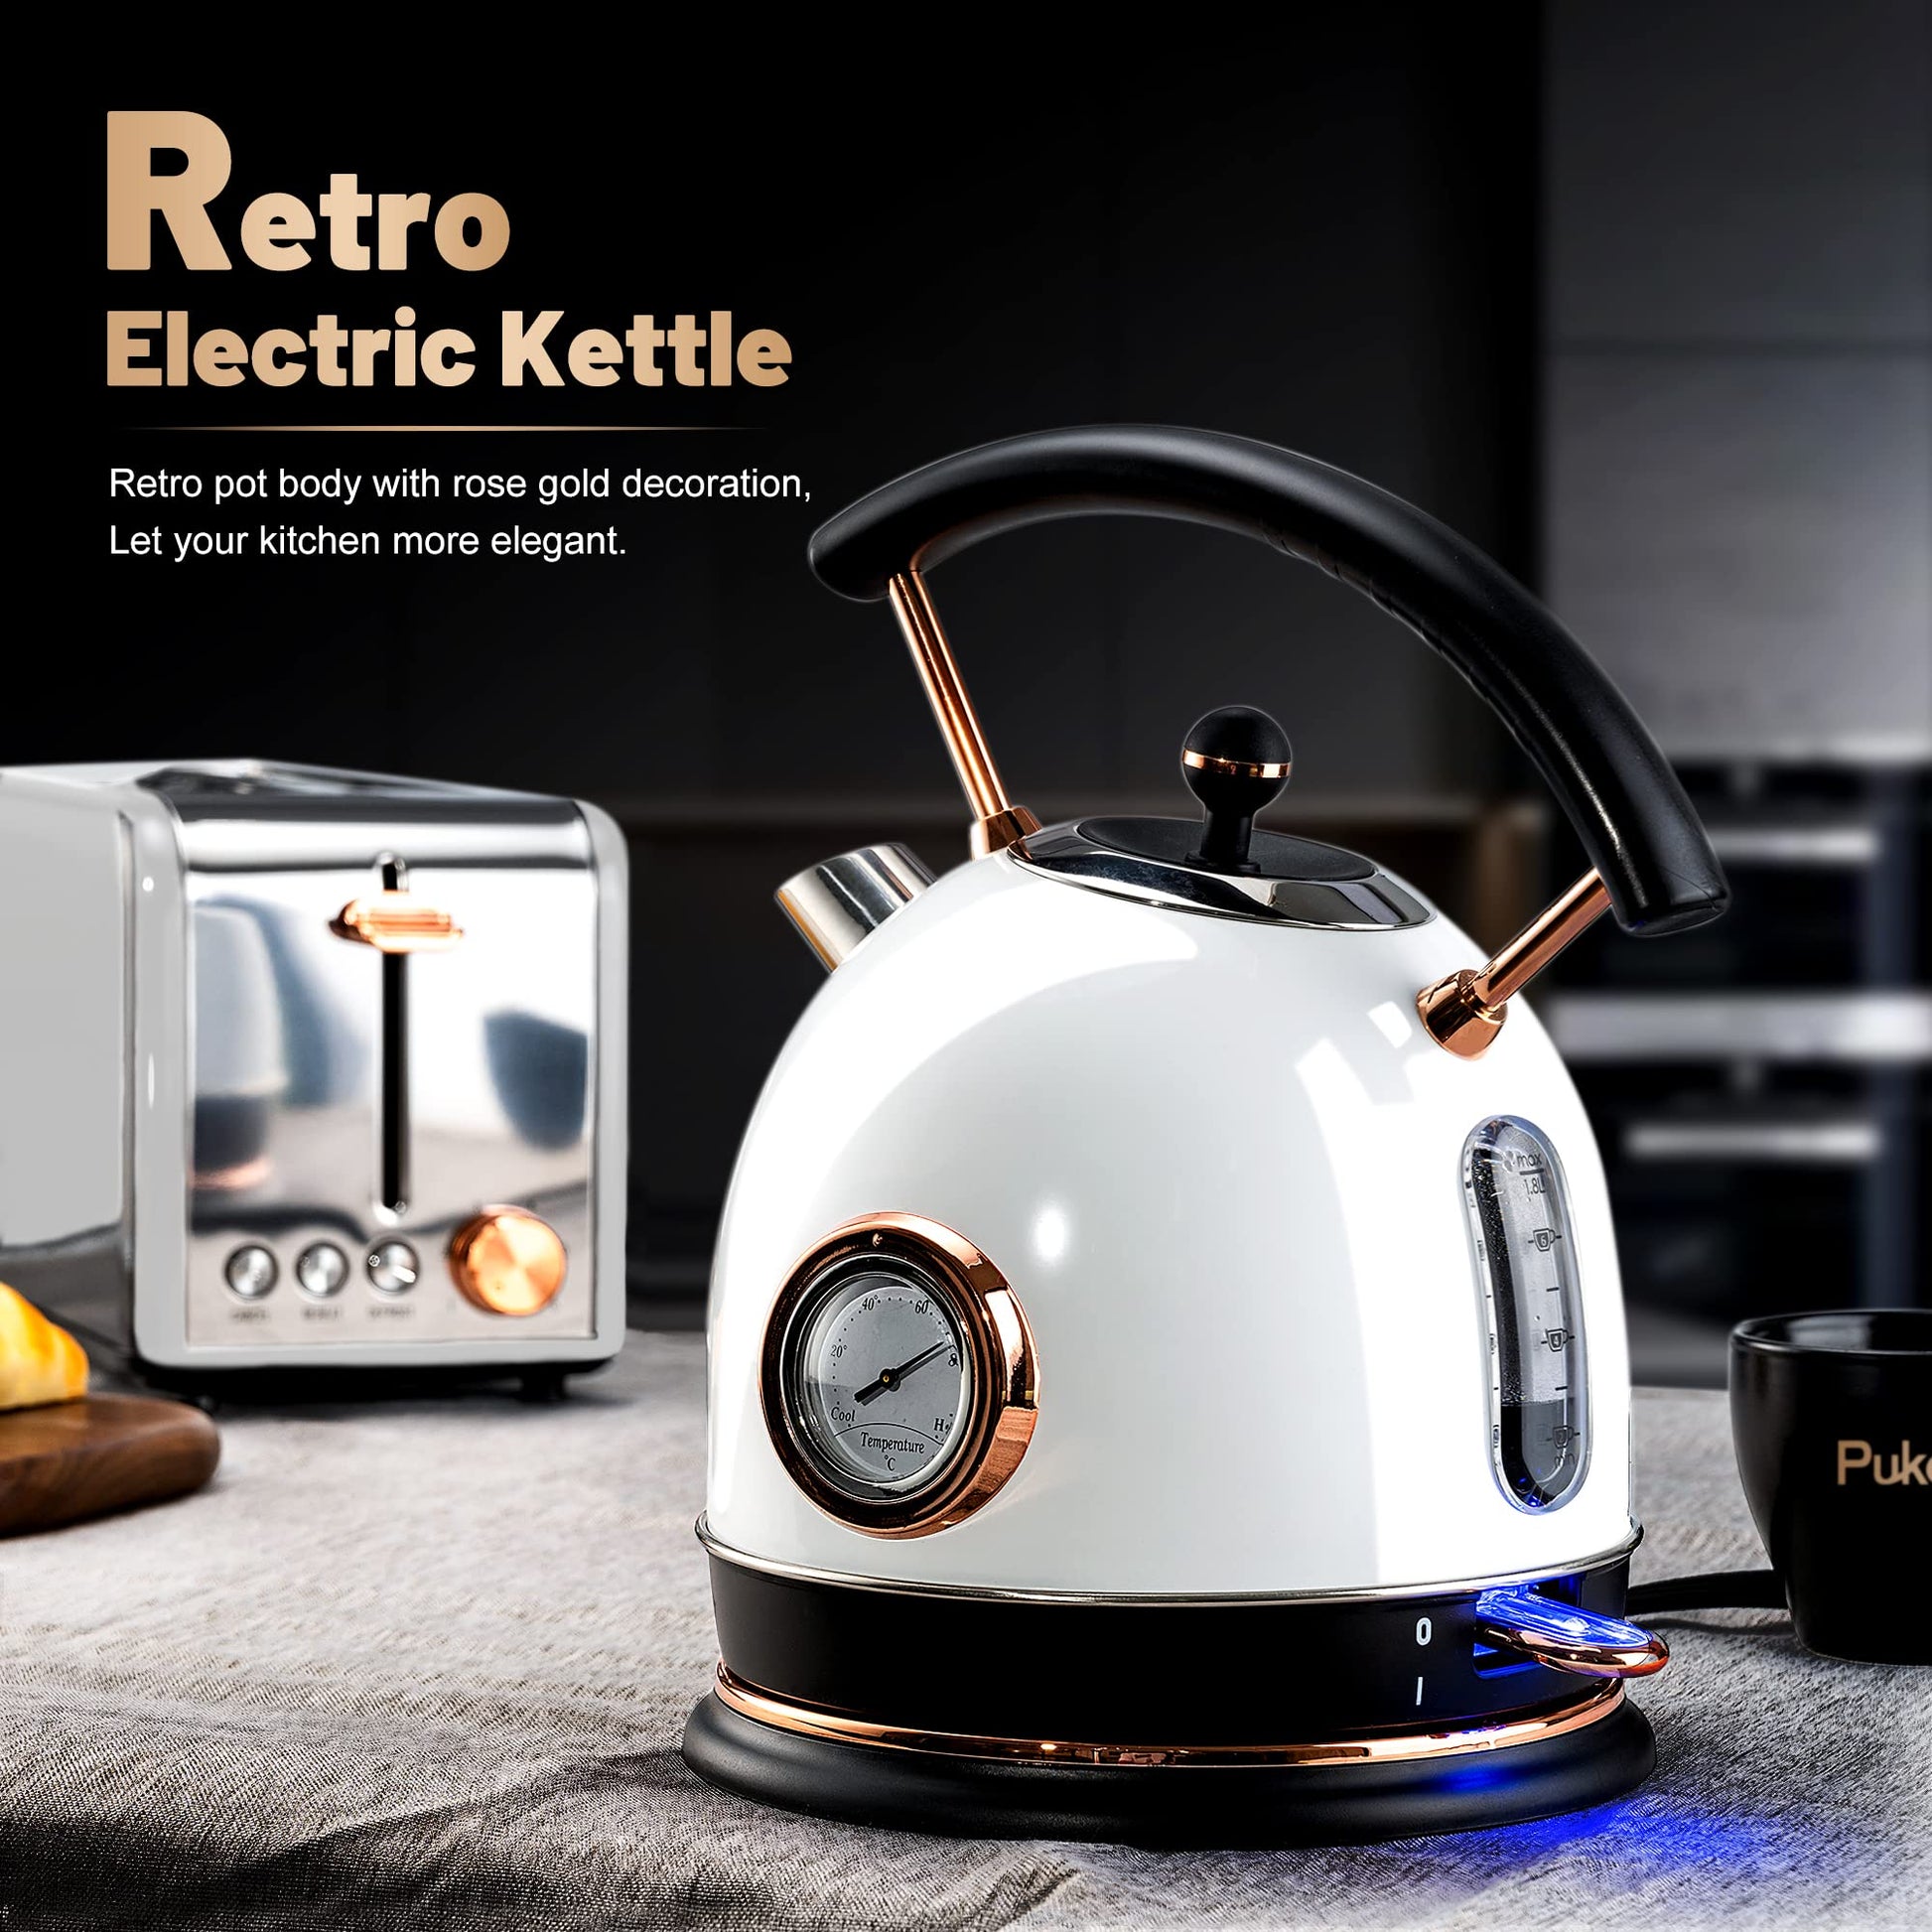 PACK KETTLE RETRO STYLANCE 1 L Bollitore elettrico + TOAST RETRO STYLANCE  Piccolo Tostapane